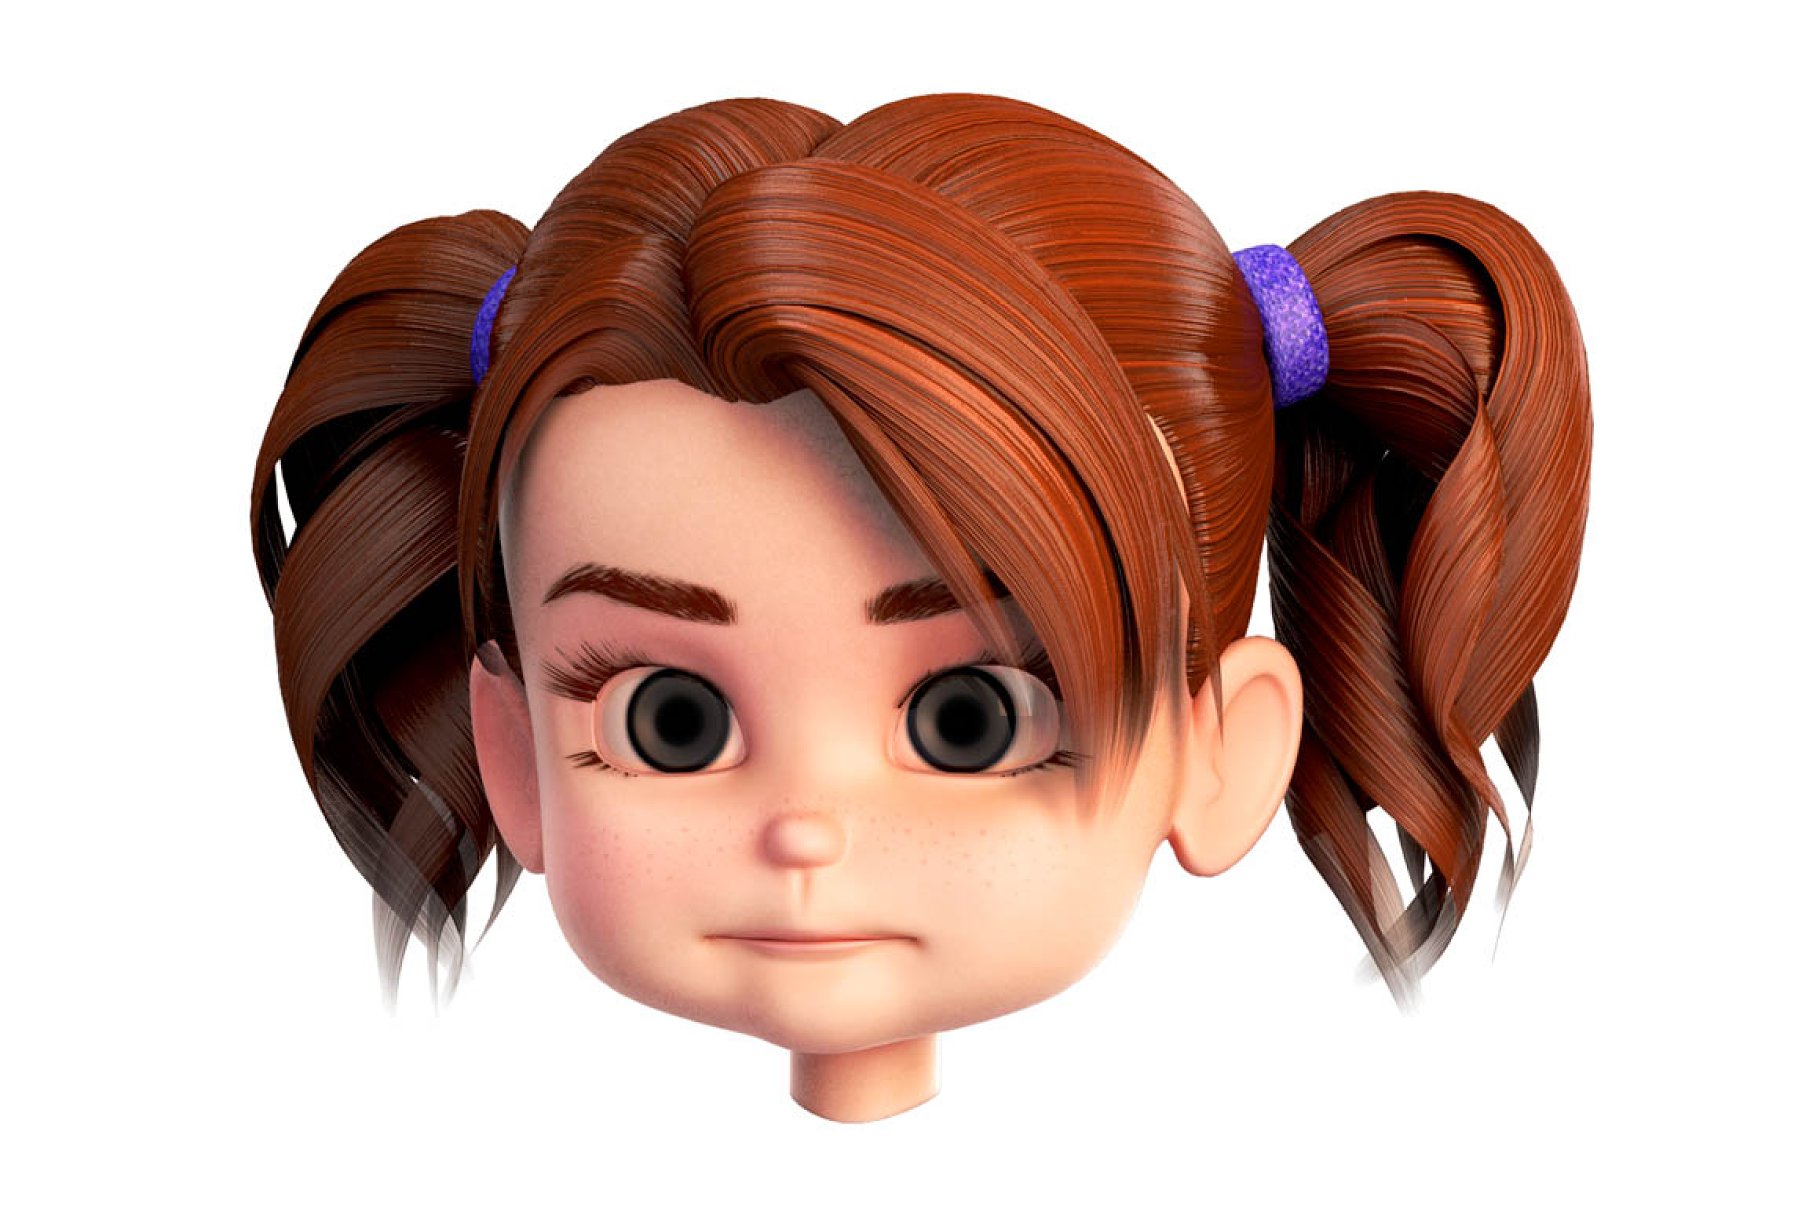 Mockup of girl head on the right side on a white background.